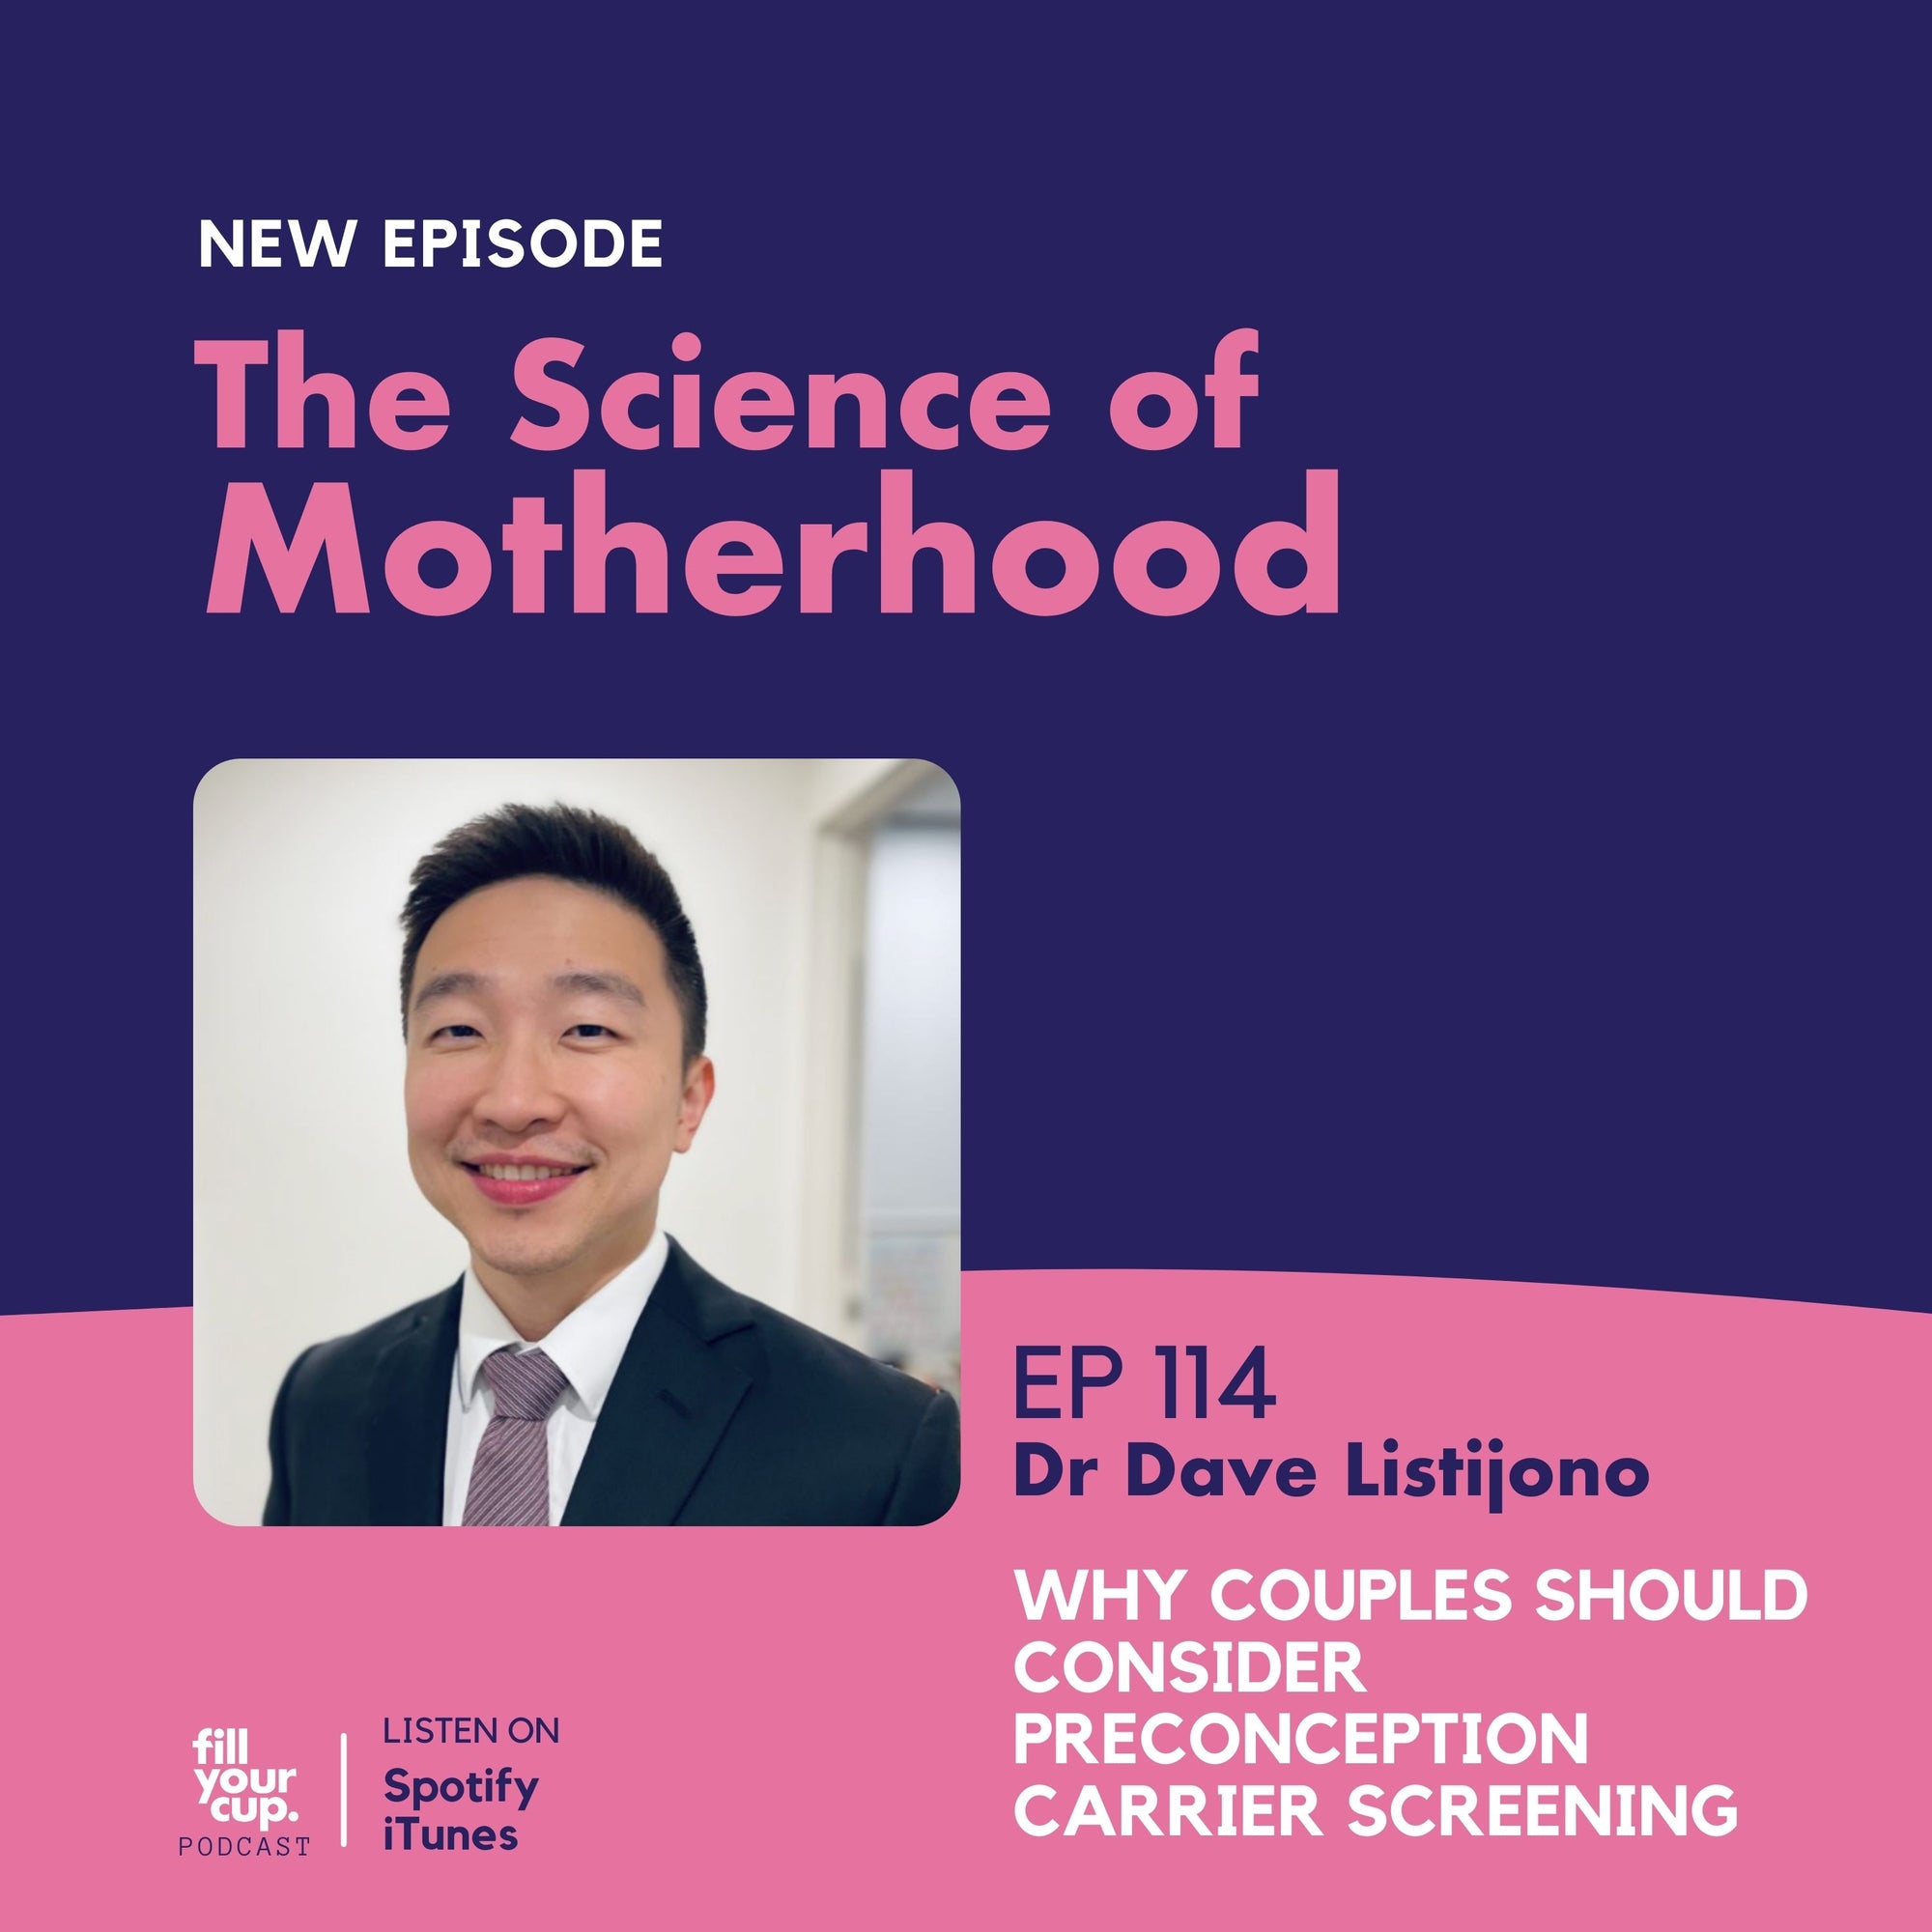 Ep 114. Dr Dave Listijono - Why Couples Should Consider Preconception carrier screening